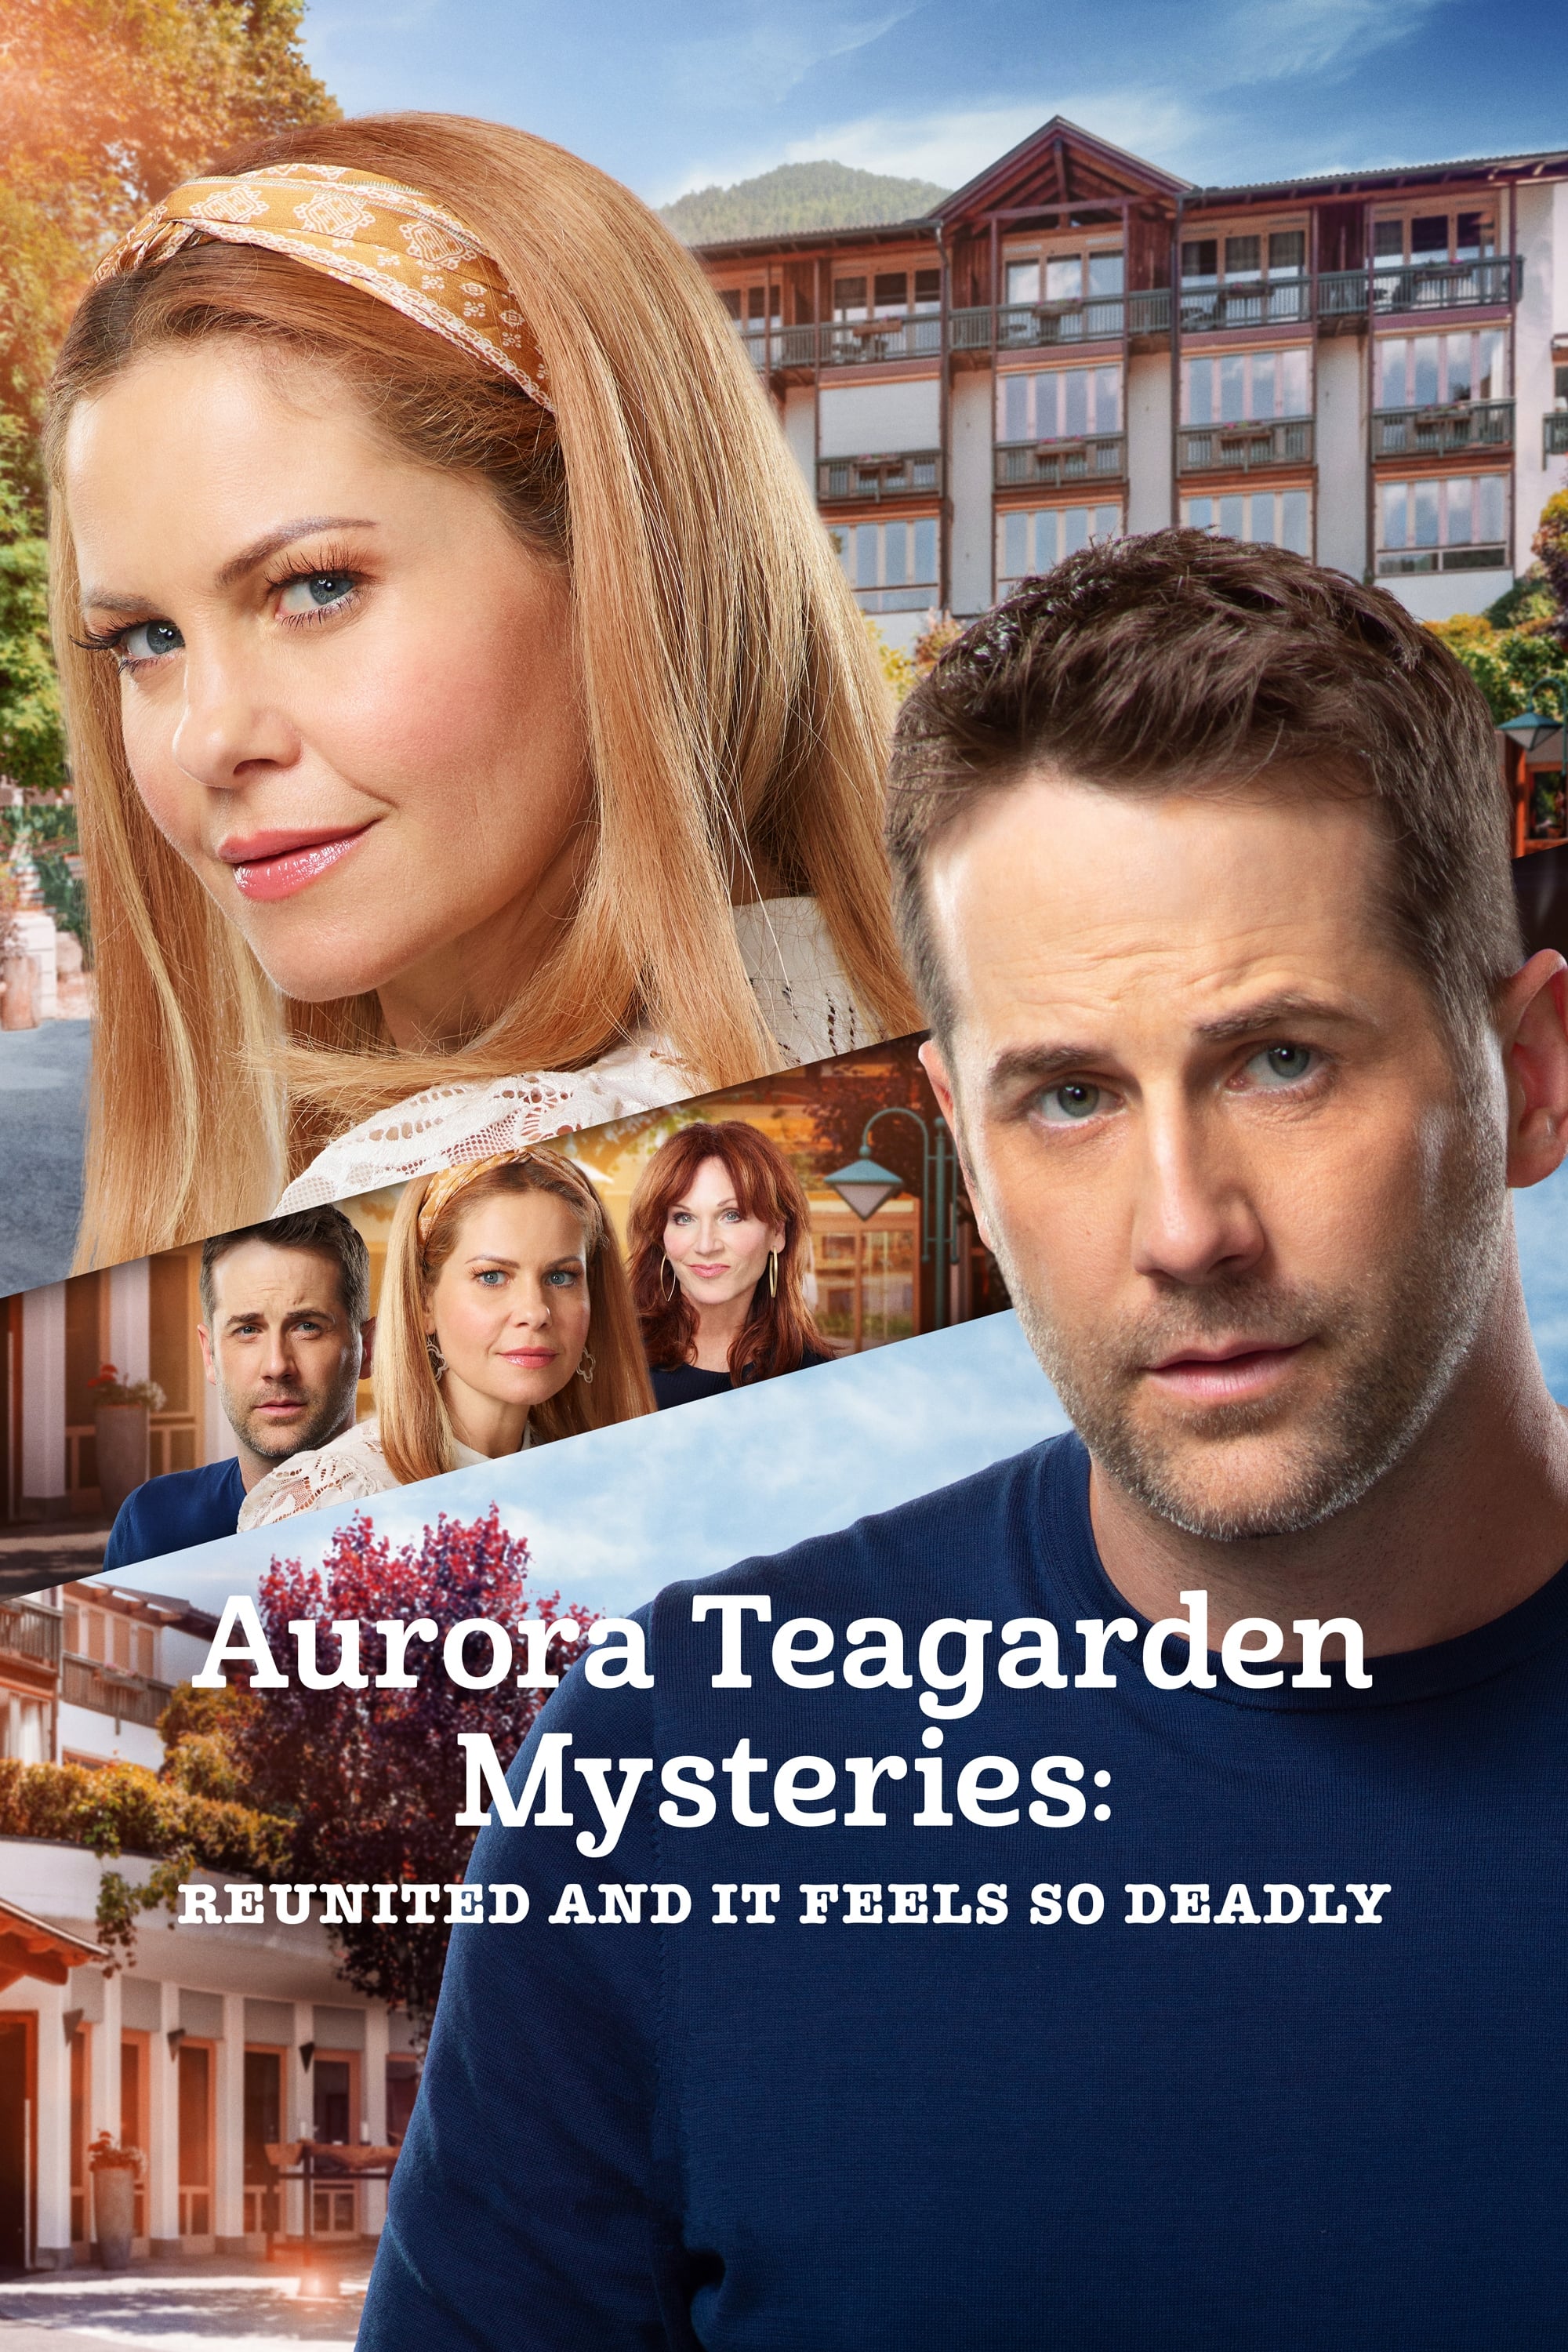 Aurora Teagarden Mysteries Reunited and It Feels So Deadly (2020